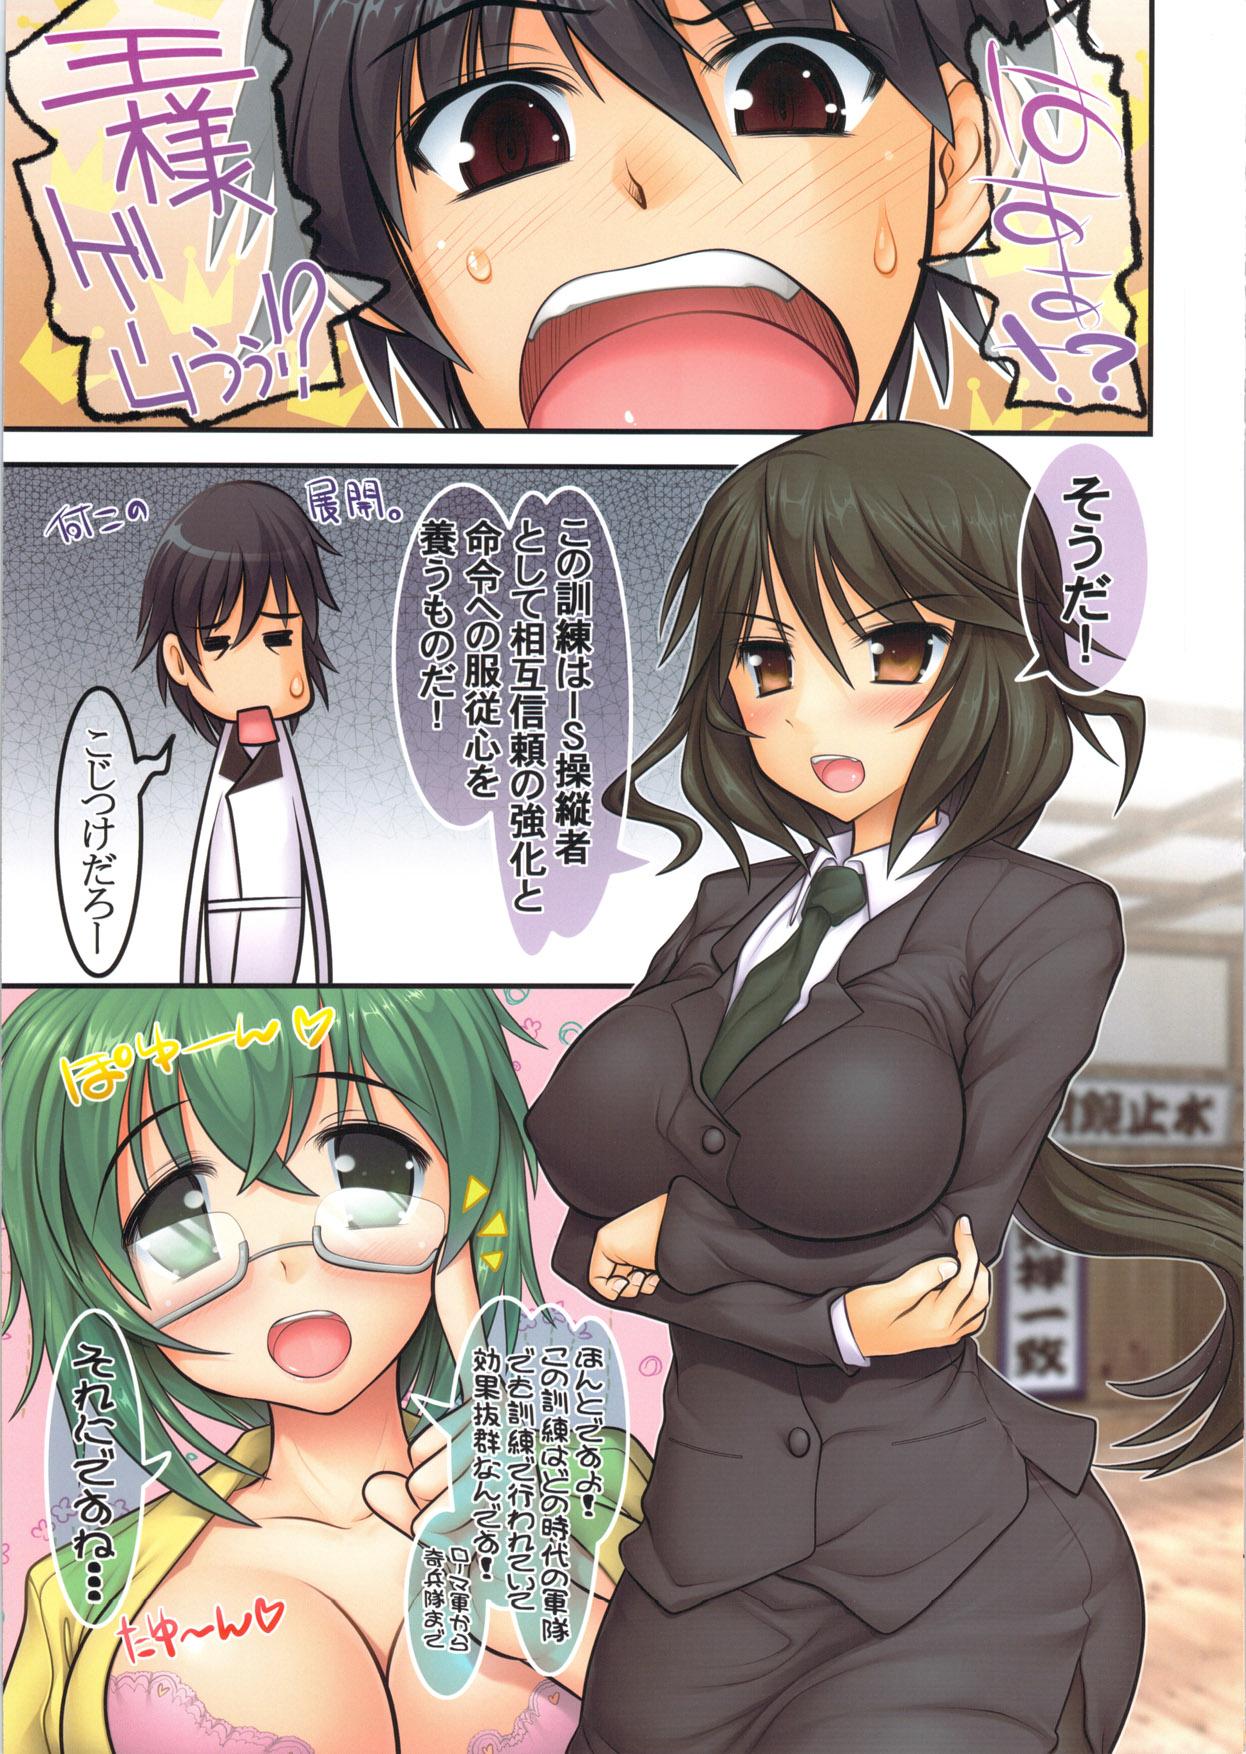 Mediumtits Char to Cecilia to Sonota to Ousama Game! - Infinite stratos Gayfuck - Page 3